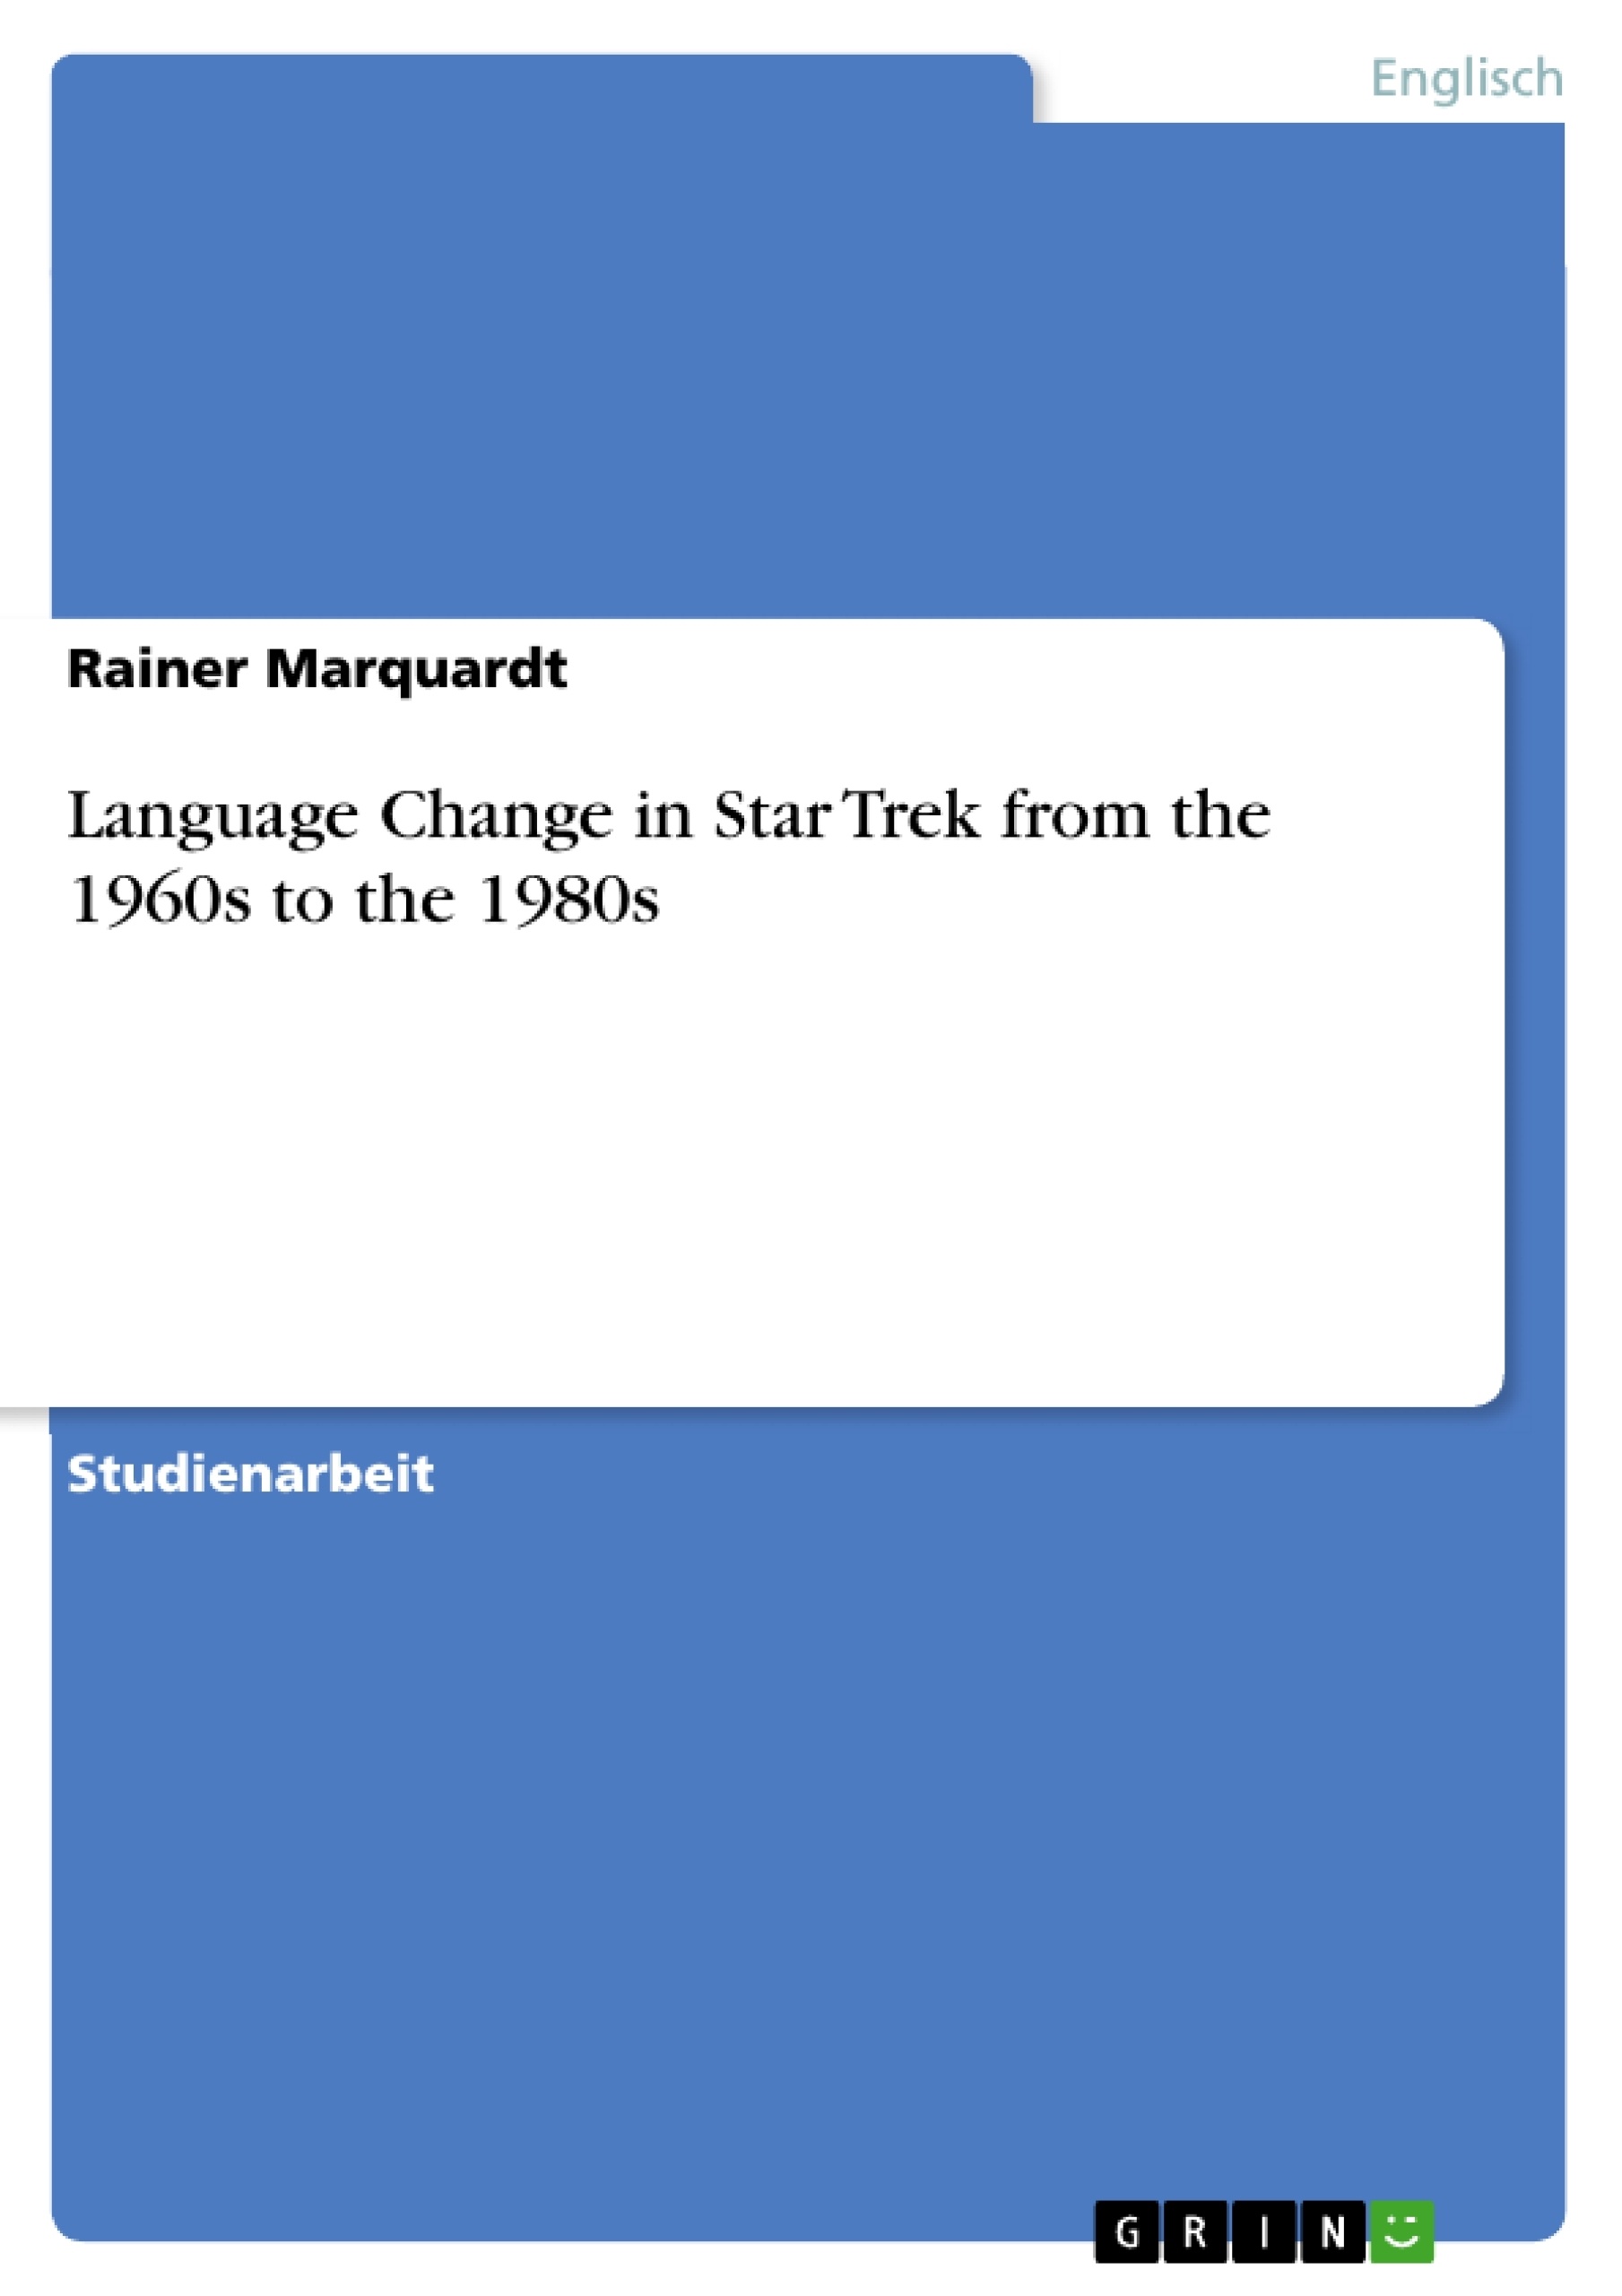 Título: Language Change in Star Trek from the 1960s to the 1980s